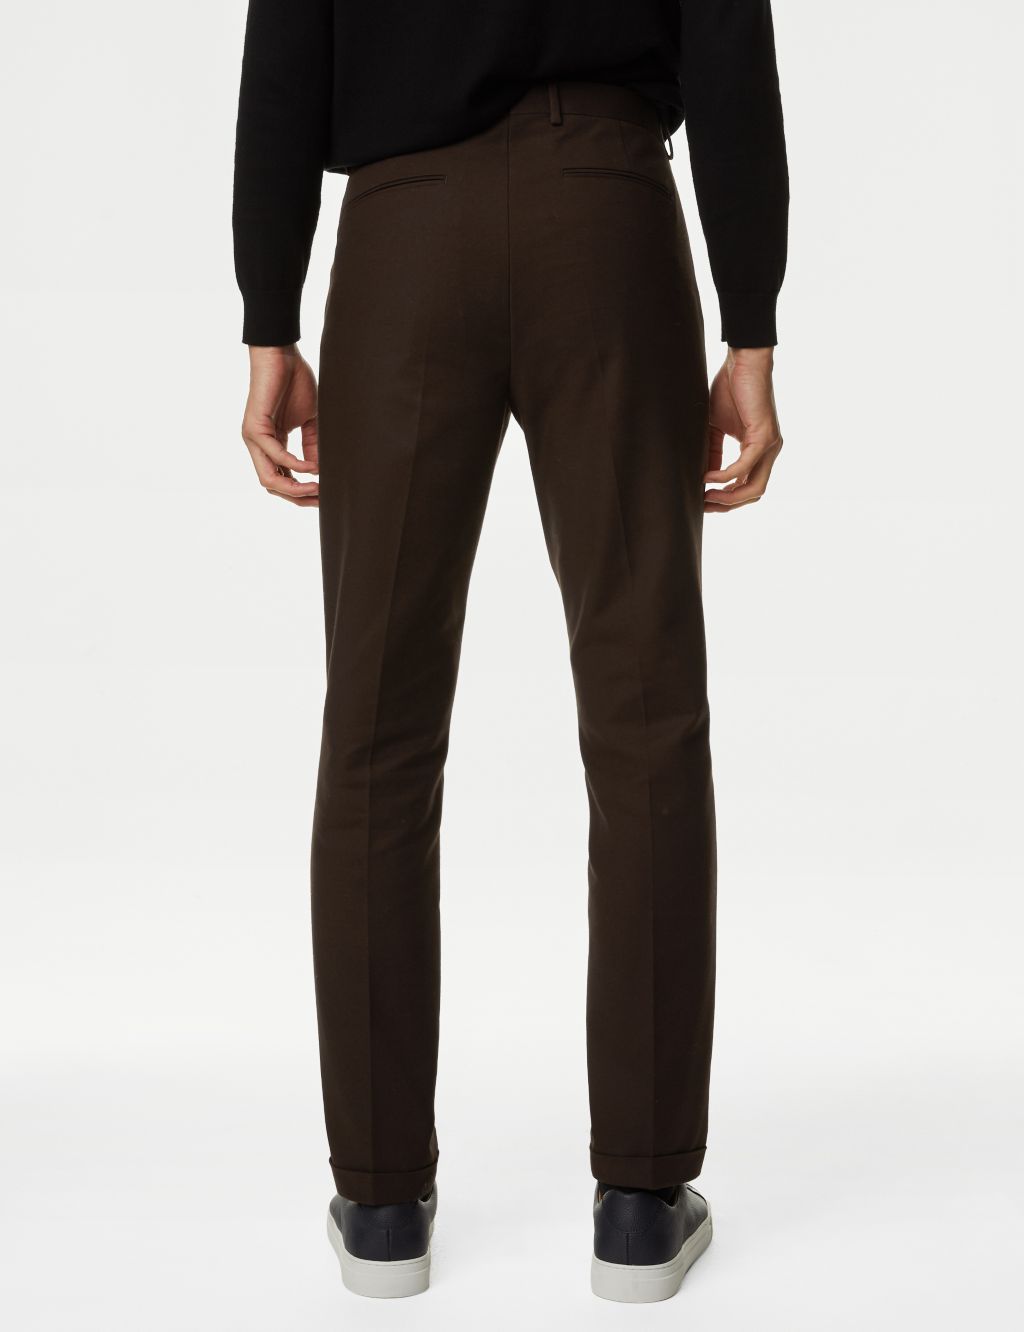 Tapered Fit Smart Stretch Chinos image 6